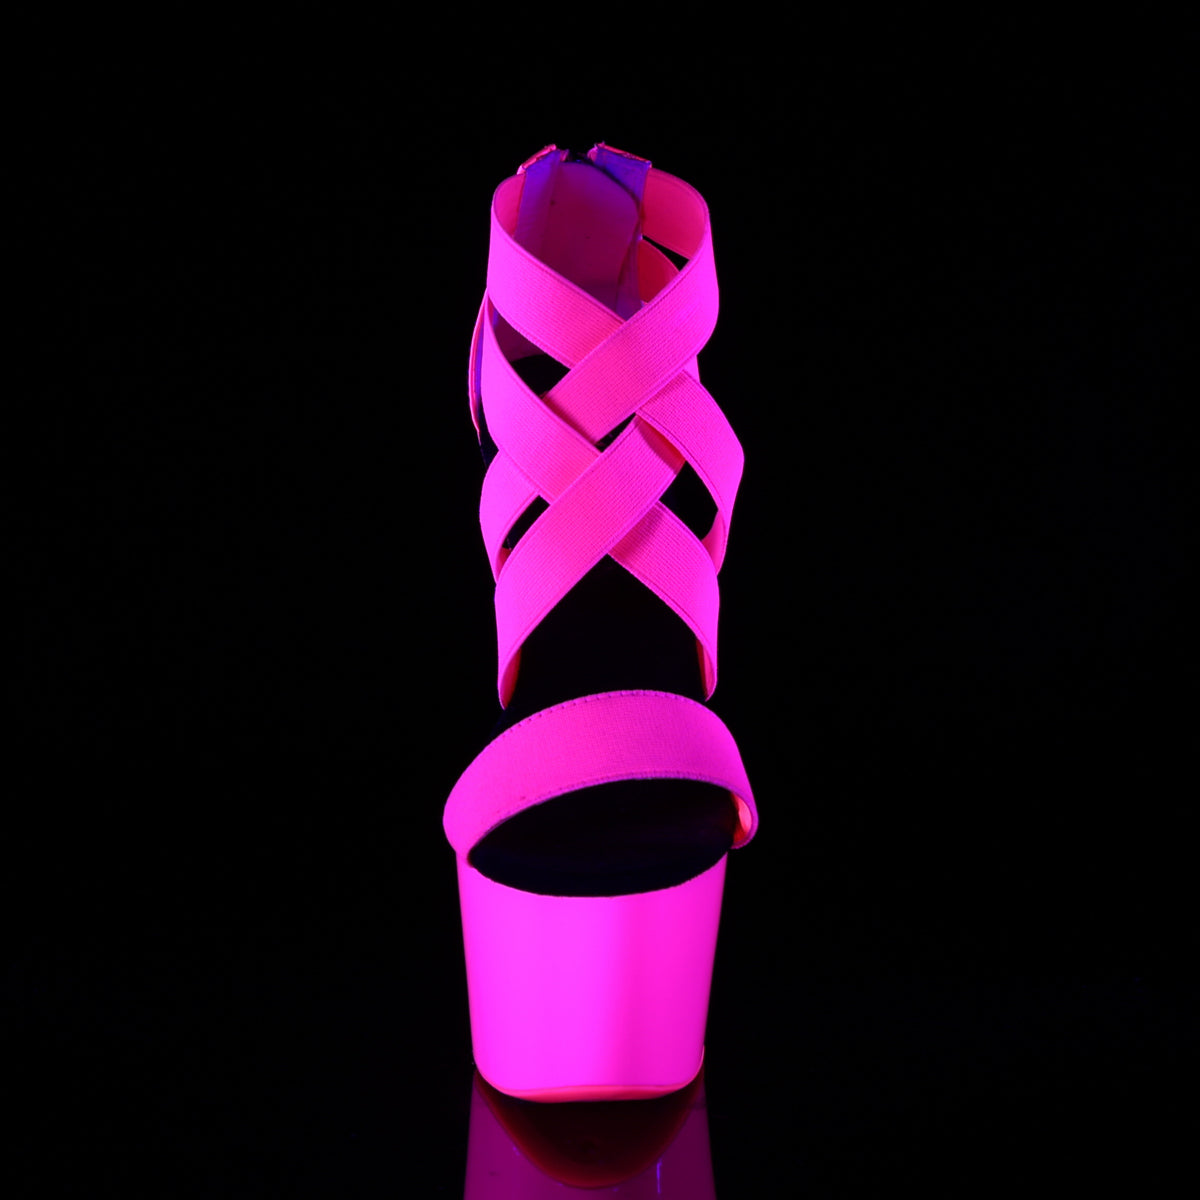 ADORE-769UV Sexy 7 Inch Heel Neon Hot Pink Pole Dancer Shoes-Pleaser- Sexy Shoes Alternative Footwear